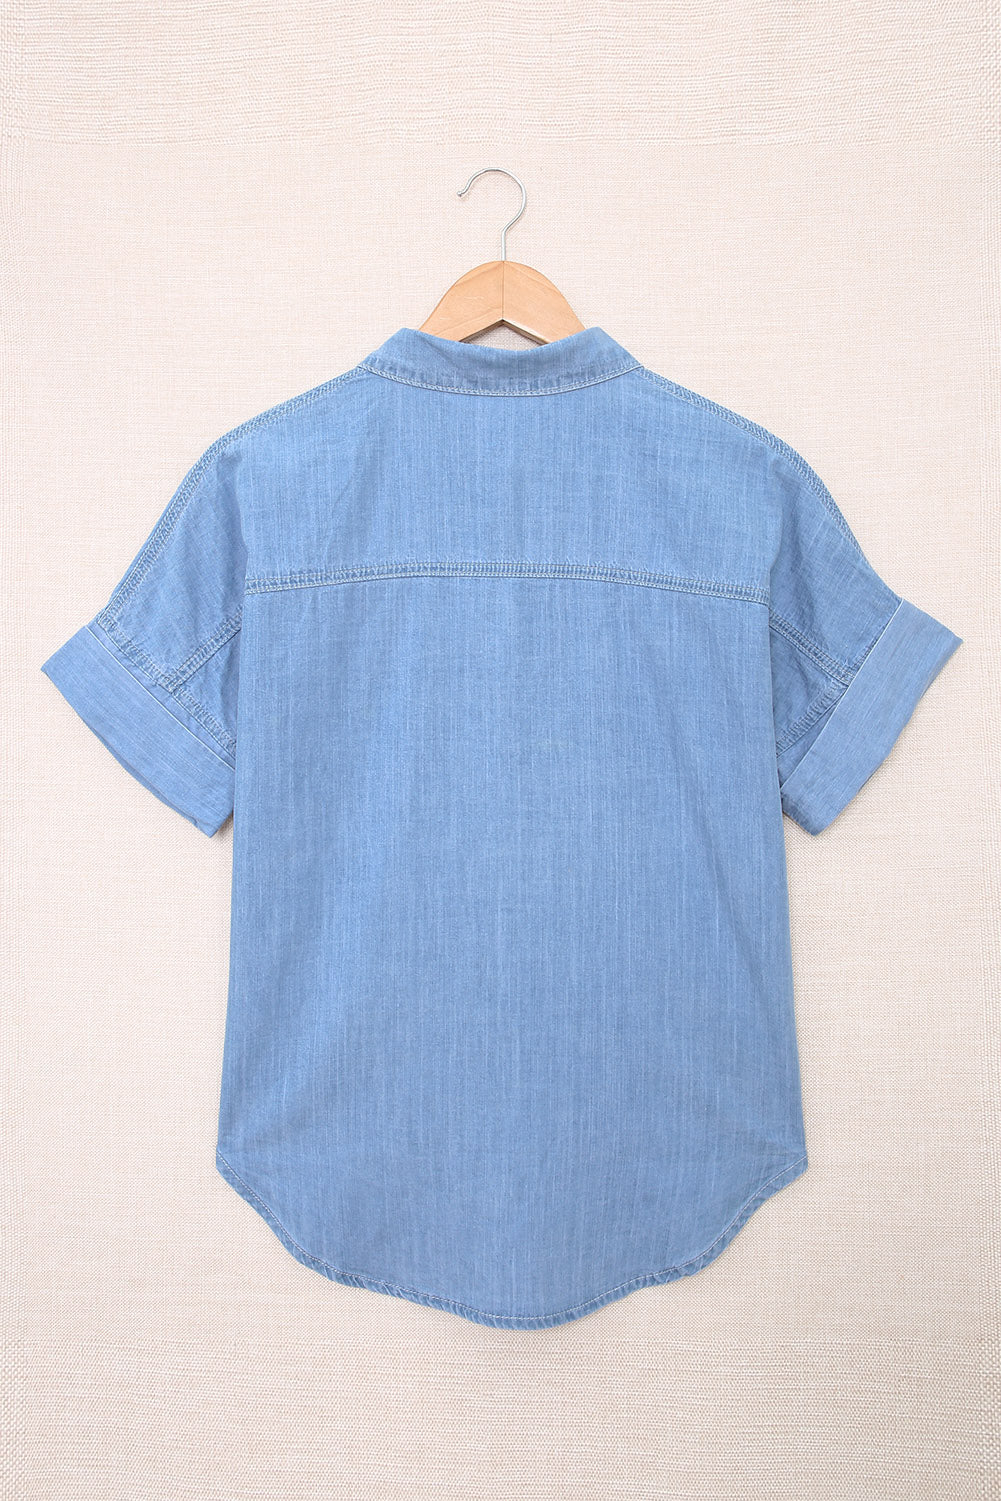 Alexis Button Front Collared Short Sleeve Shirt- 1 size Small/Dusty Blue left! FINAL SALE!